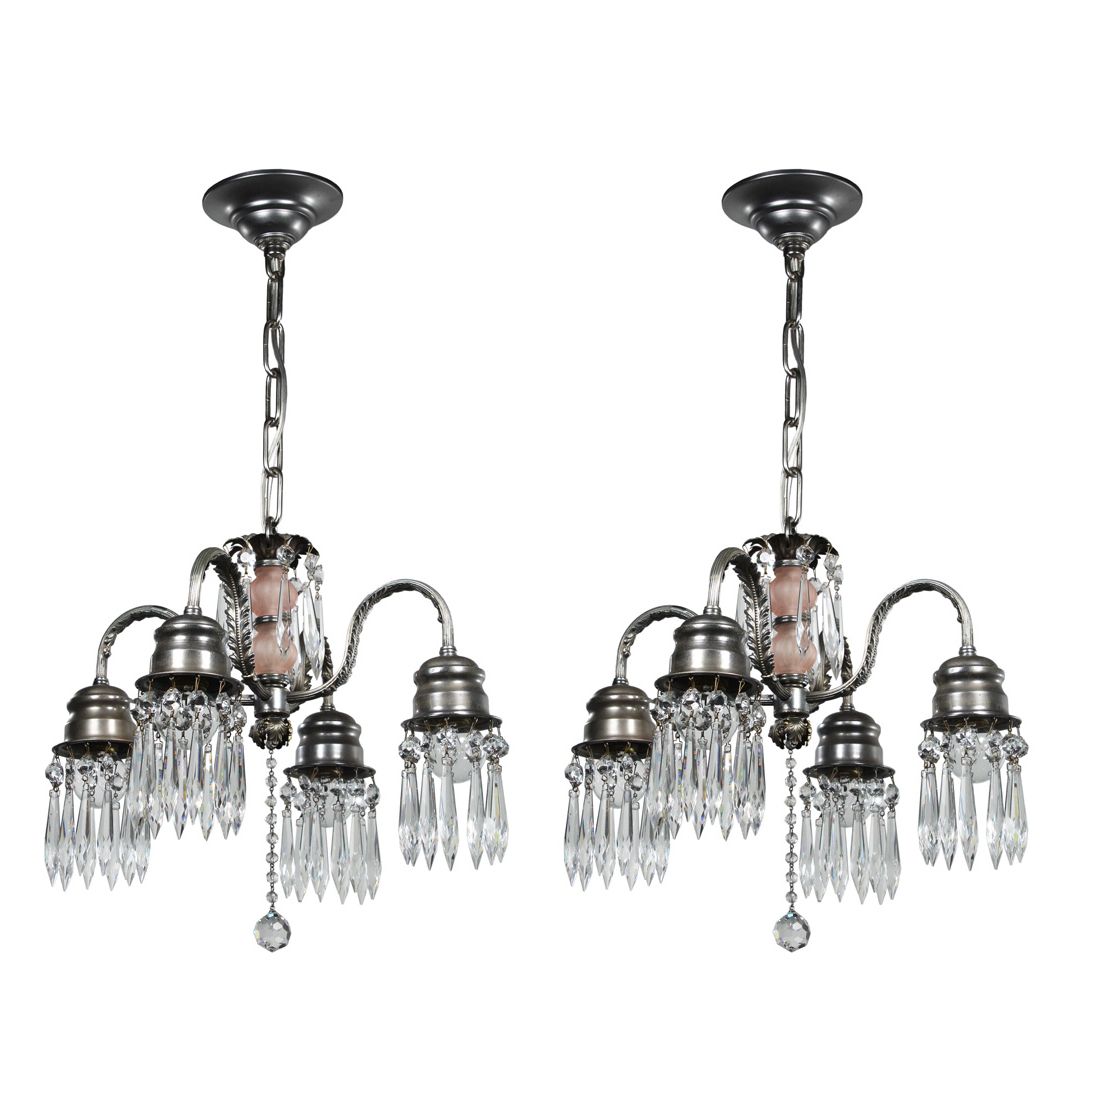 Sold Matching Antique Four Light Chandeliers With Prisms Regarding Most Popular Four Light Antique Silver Chandeliers (View 4 of 15)